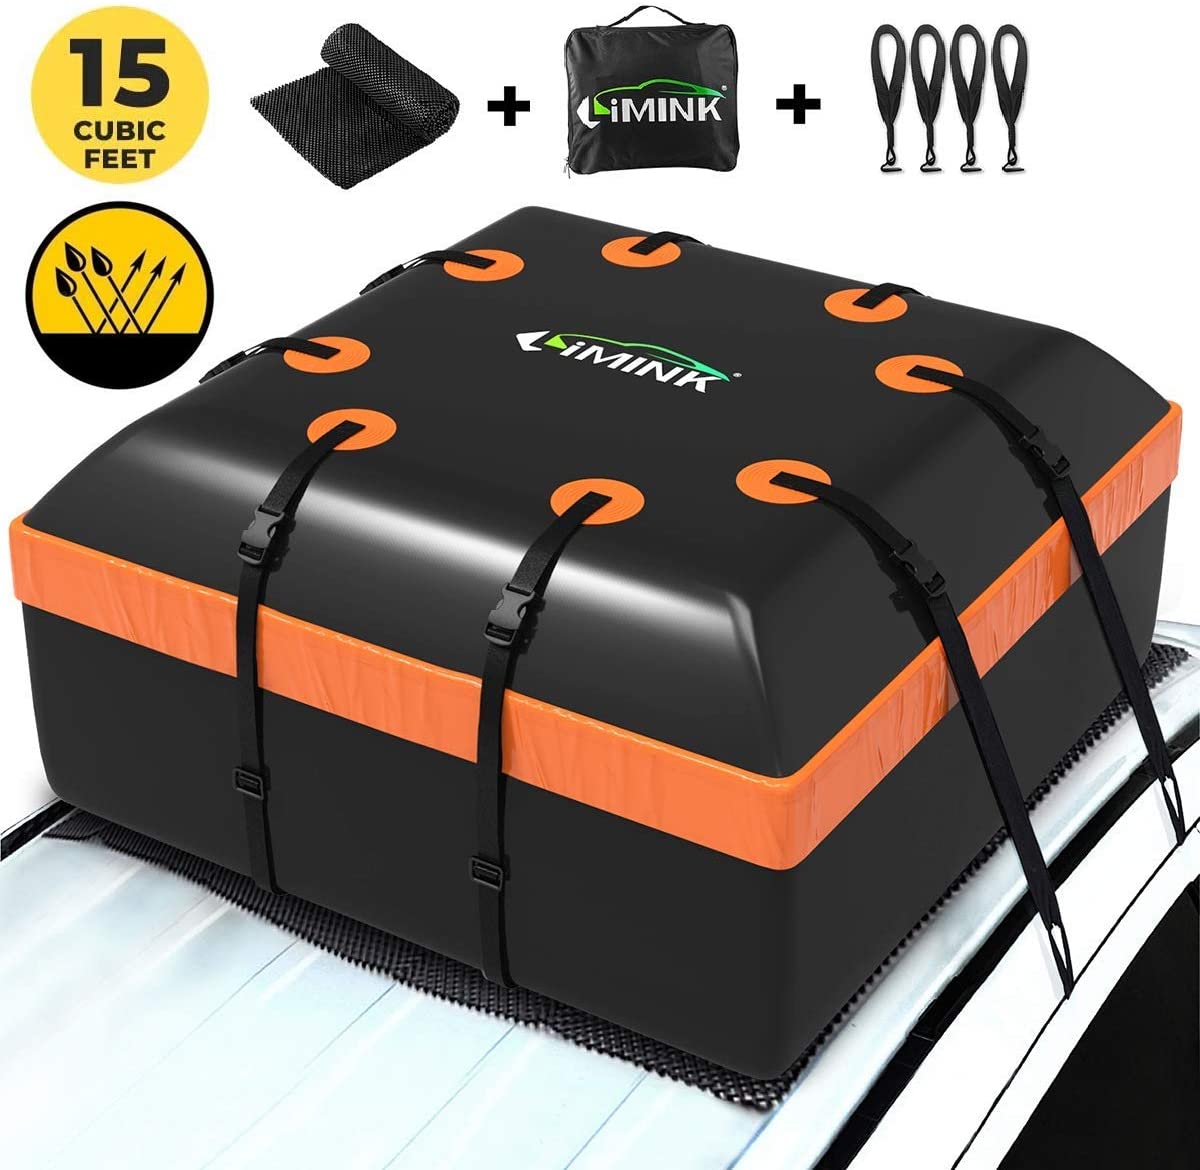 LIMINK Car Roof Cargo Carrier Bag 15 Cubic Feet Rooftop Bag PVC Coated Waterproof Zipper with Anti-Slip Mat 8 Reinforced Straps 4 Door Hooks, for Any Car (15cubic feet)